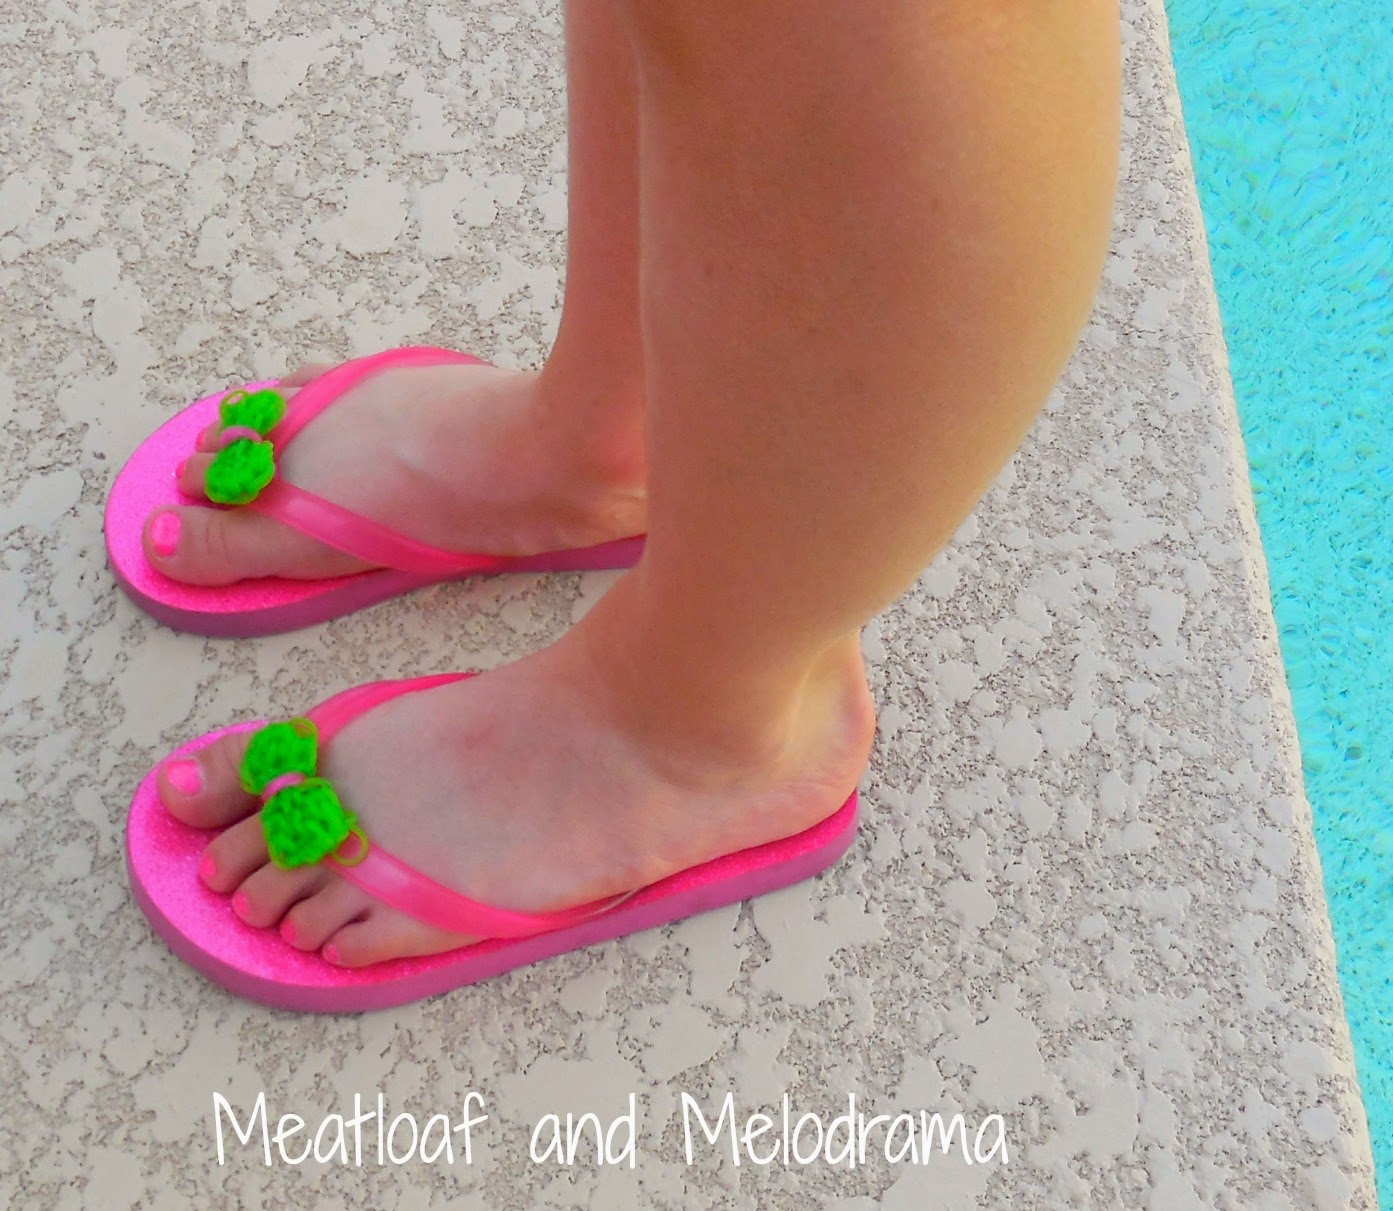 pink flip flops with rainbow loom bows by the pool